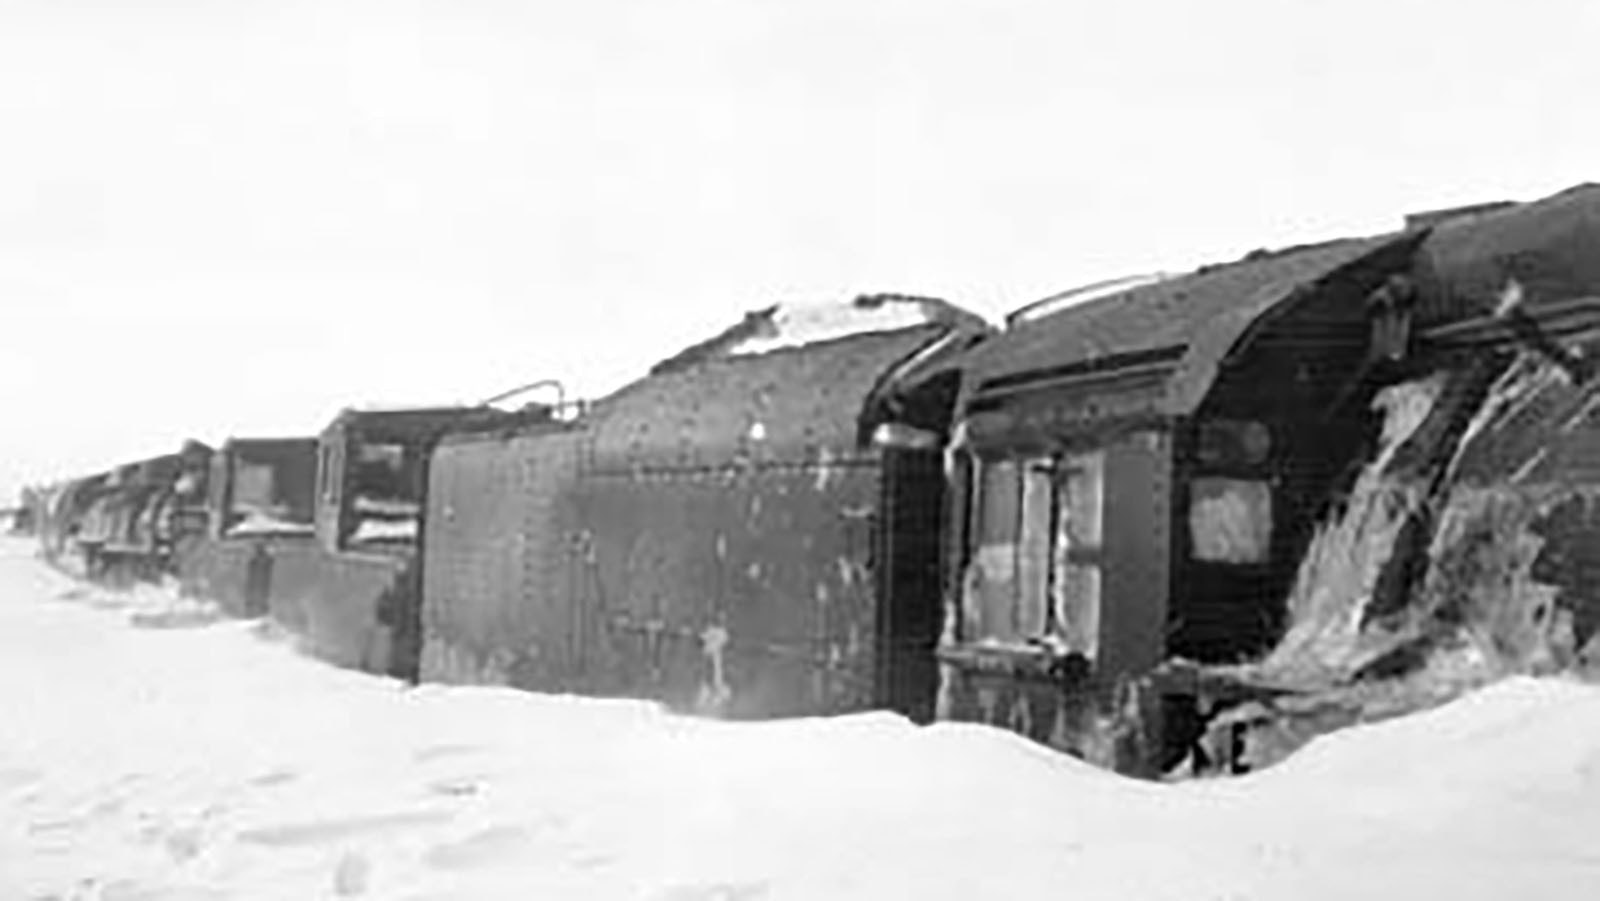 Union Pacific engineers traveling between Cheyenne, Rawlins and Green River had to deal with Wyoming’s weather. This train was snowbound in Rawlins in 1949.